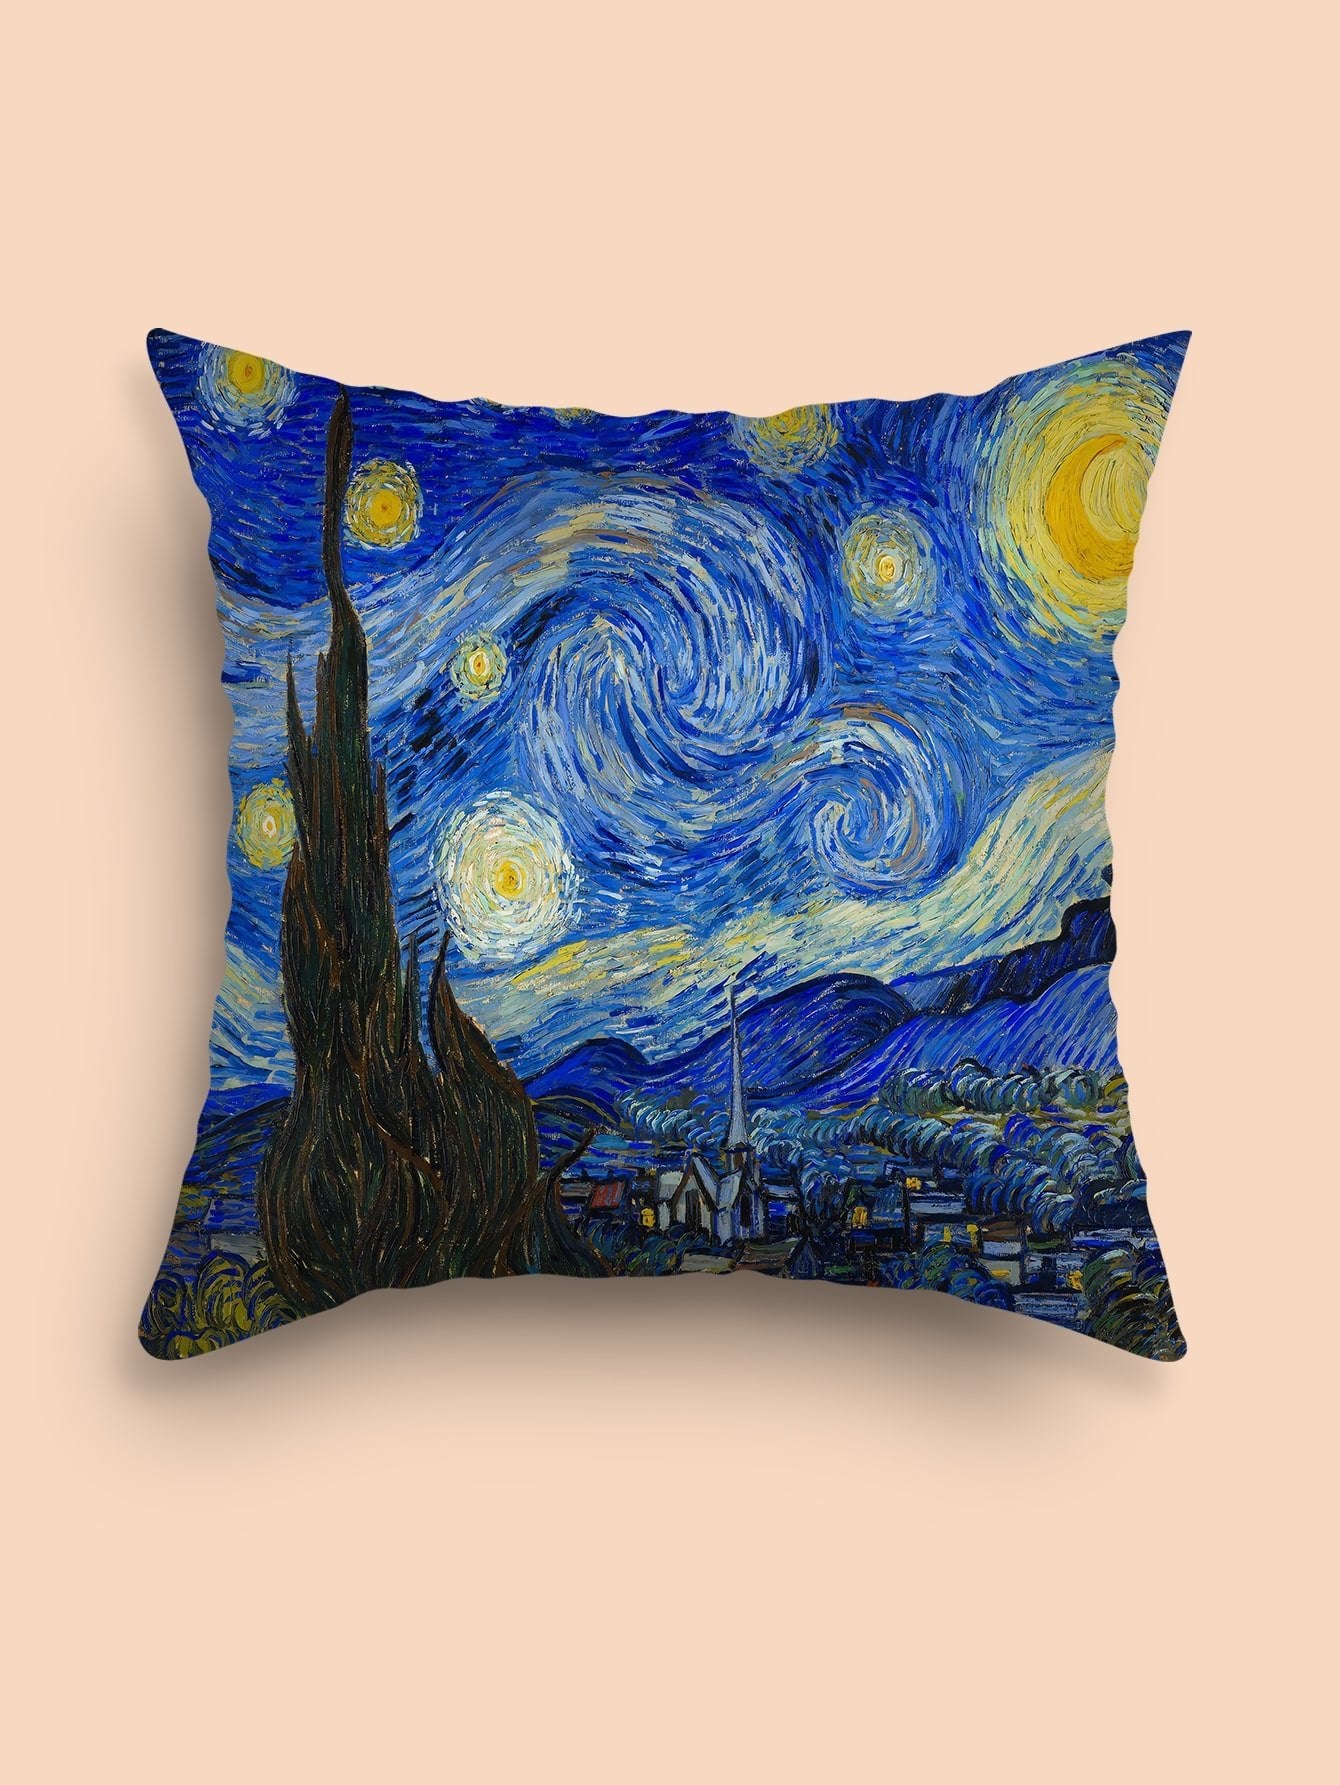 SHEIN  Oil Painting Pattern Cushion Cover Without Filler, Modern Throw Pillow Case For Sofa, Home Decor